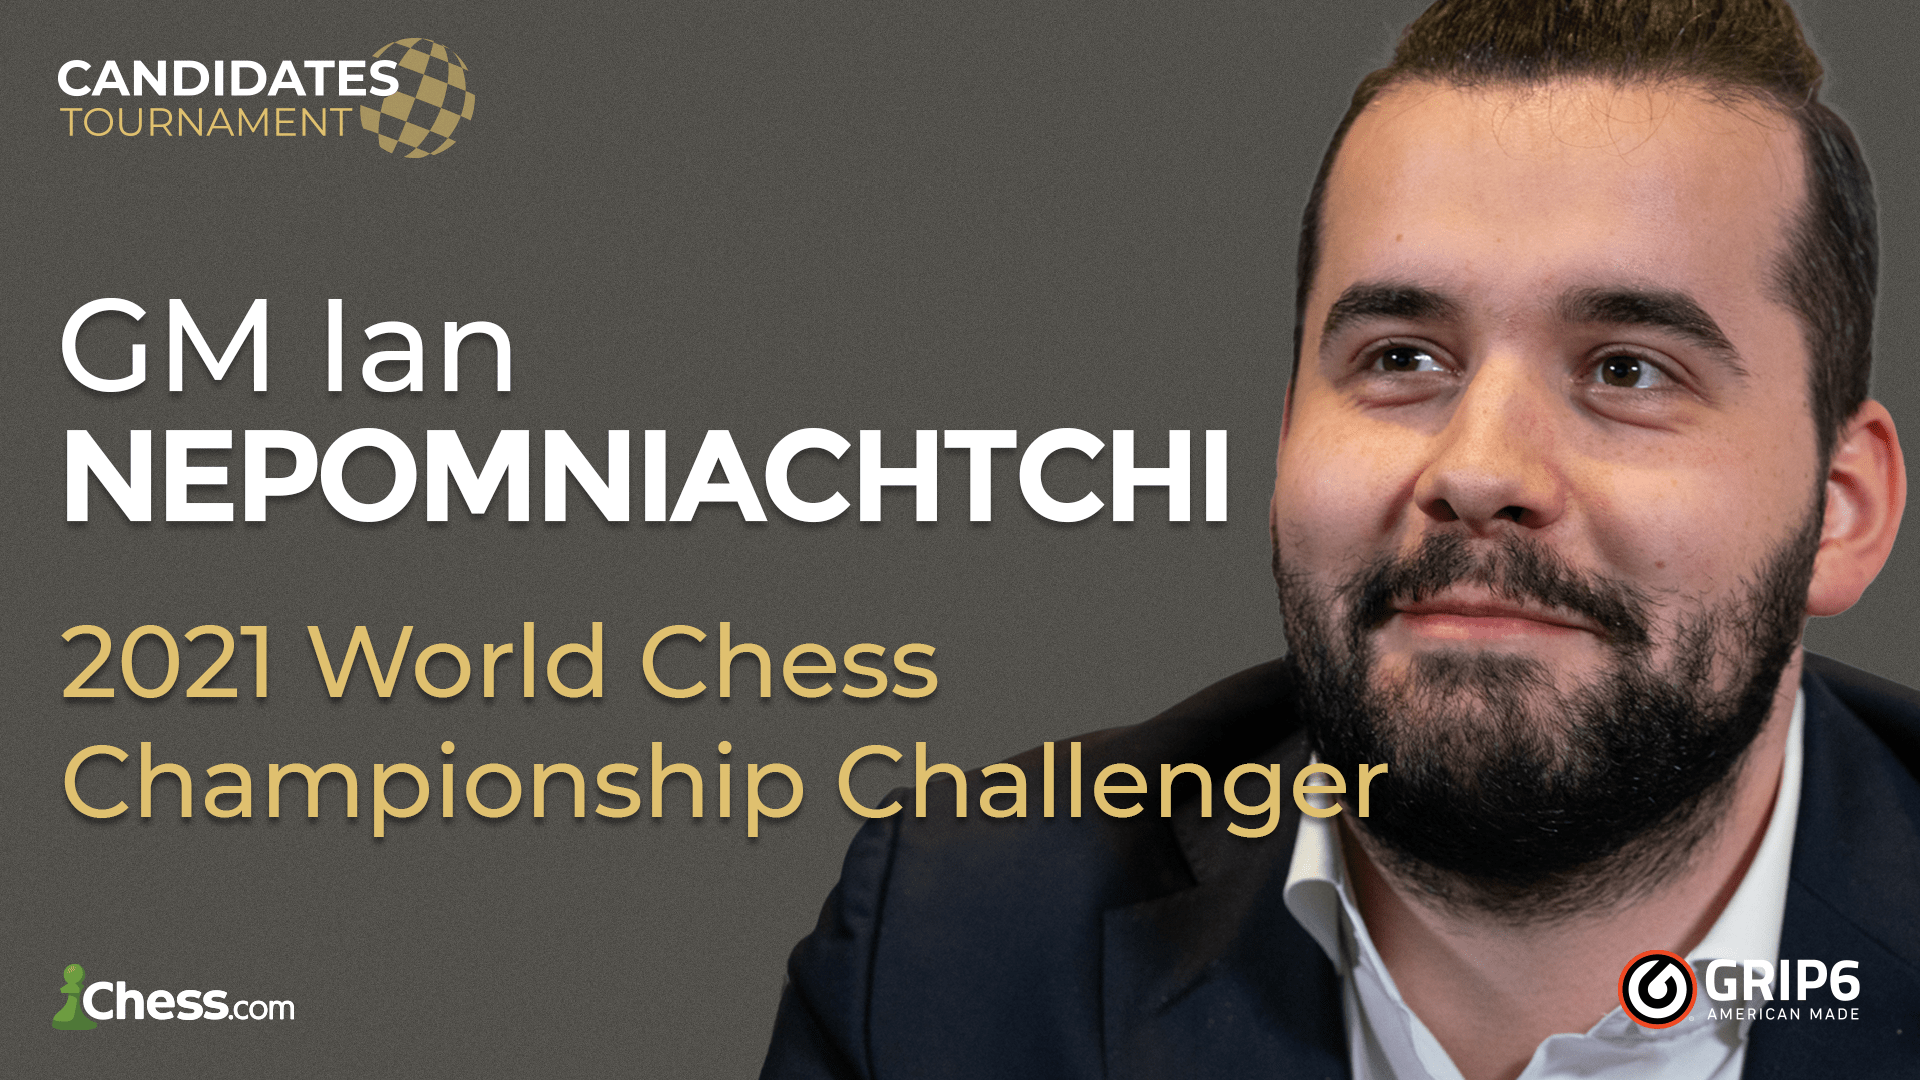 Candidates Tournament - The Path to The World Chess Championship